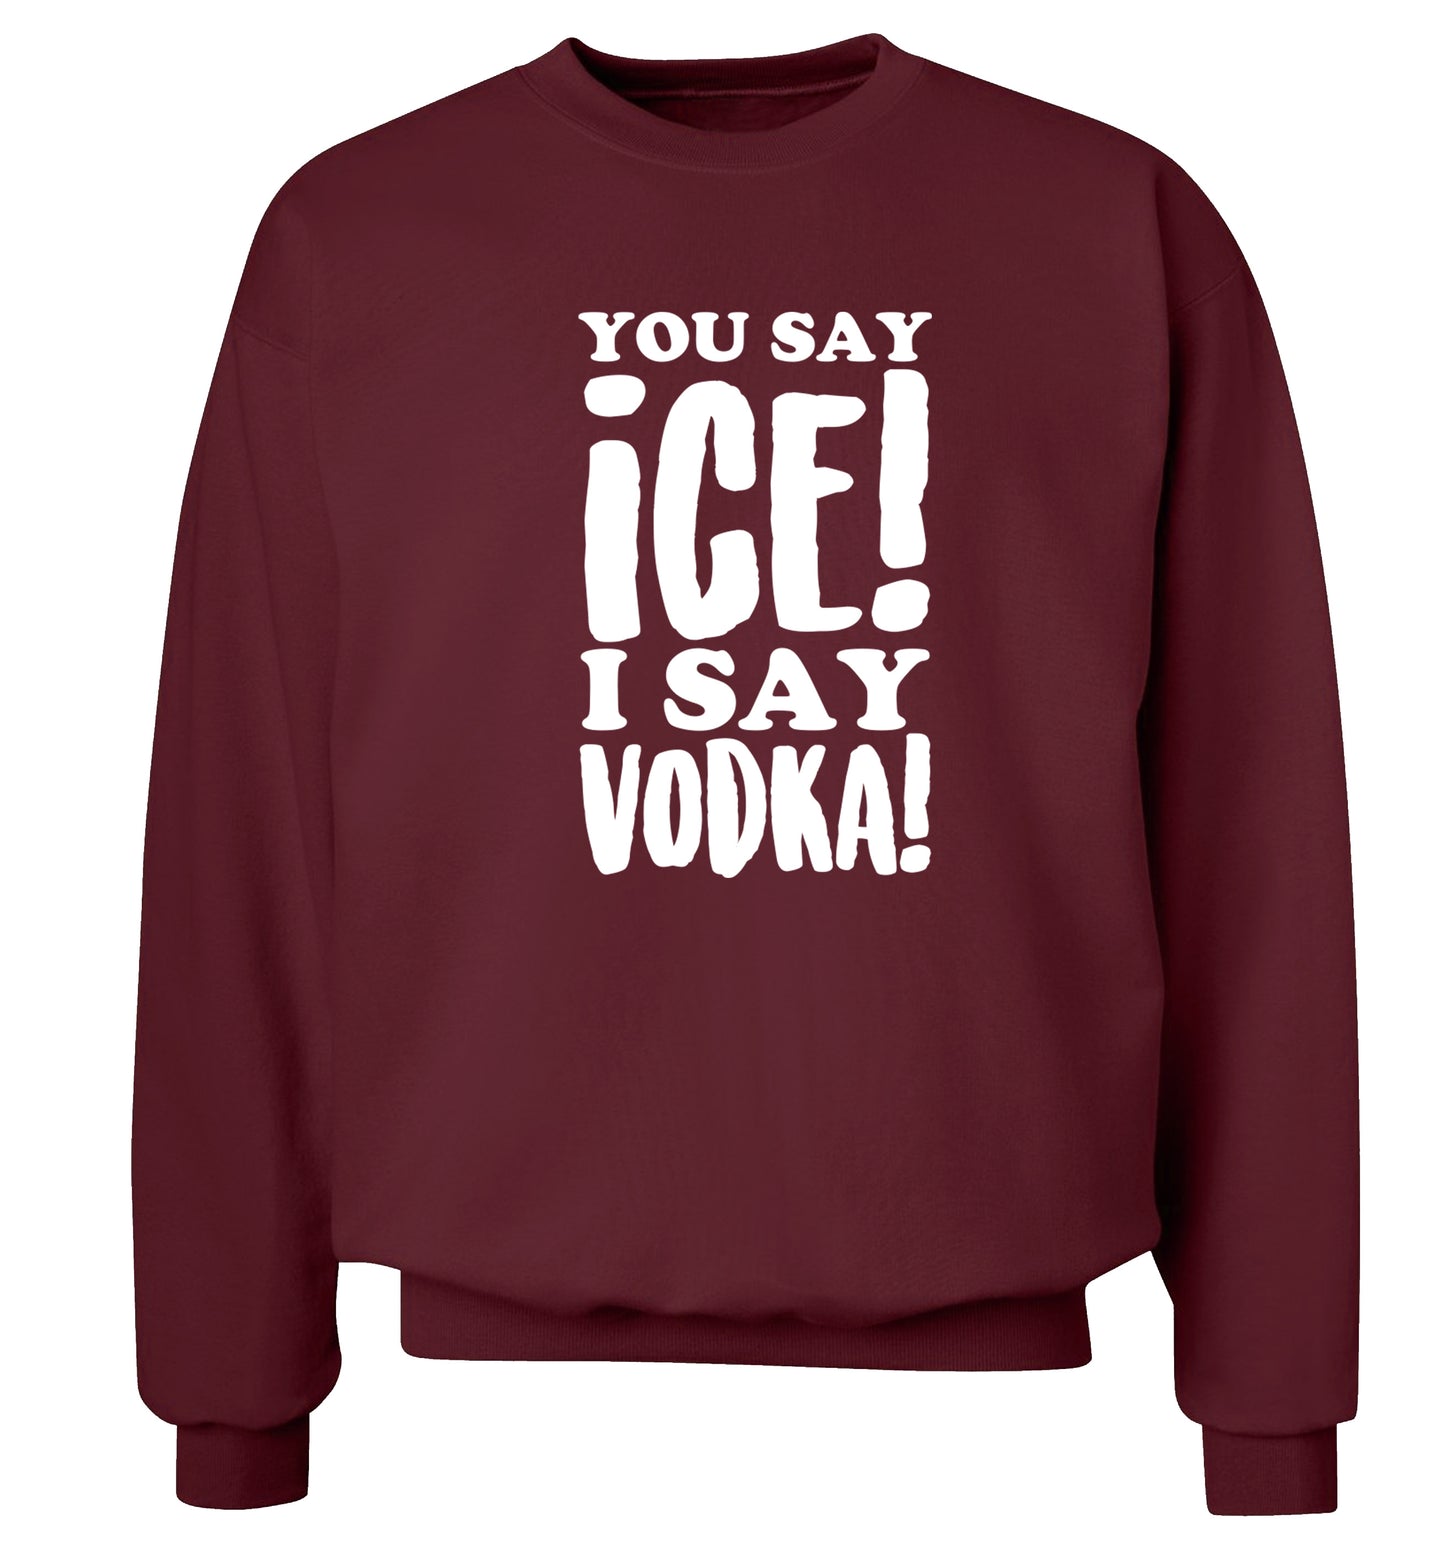 You say ice I say vodka! Adult's unisex maroon Sweater 2XL